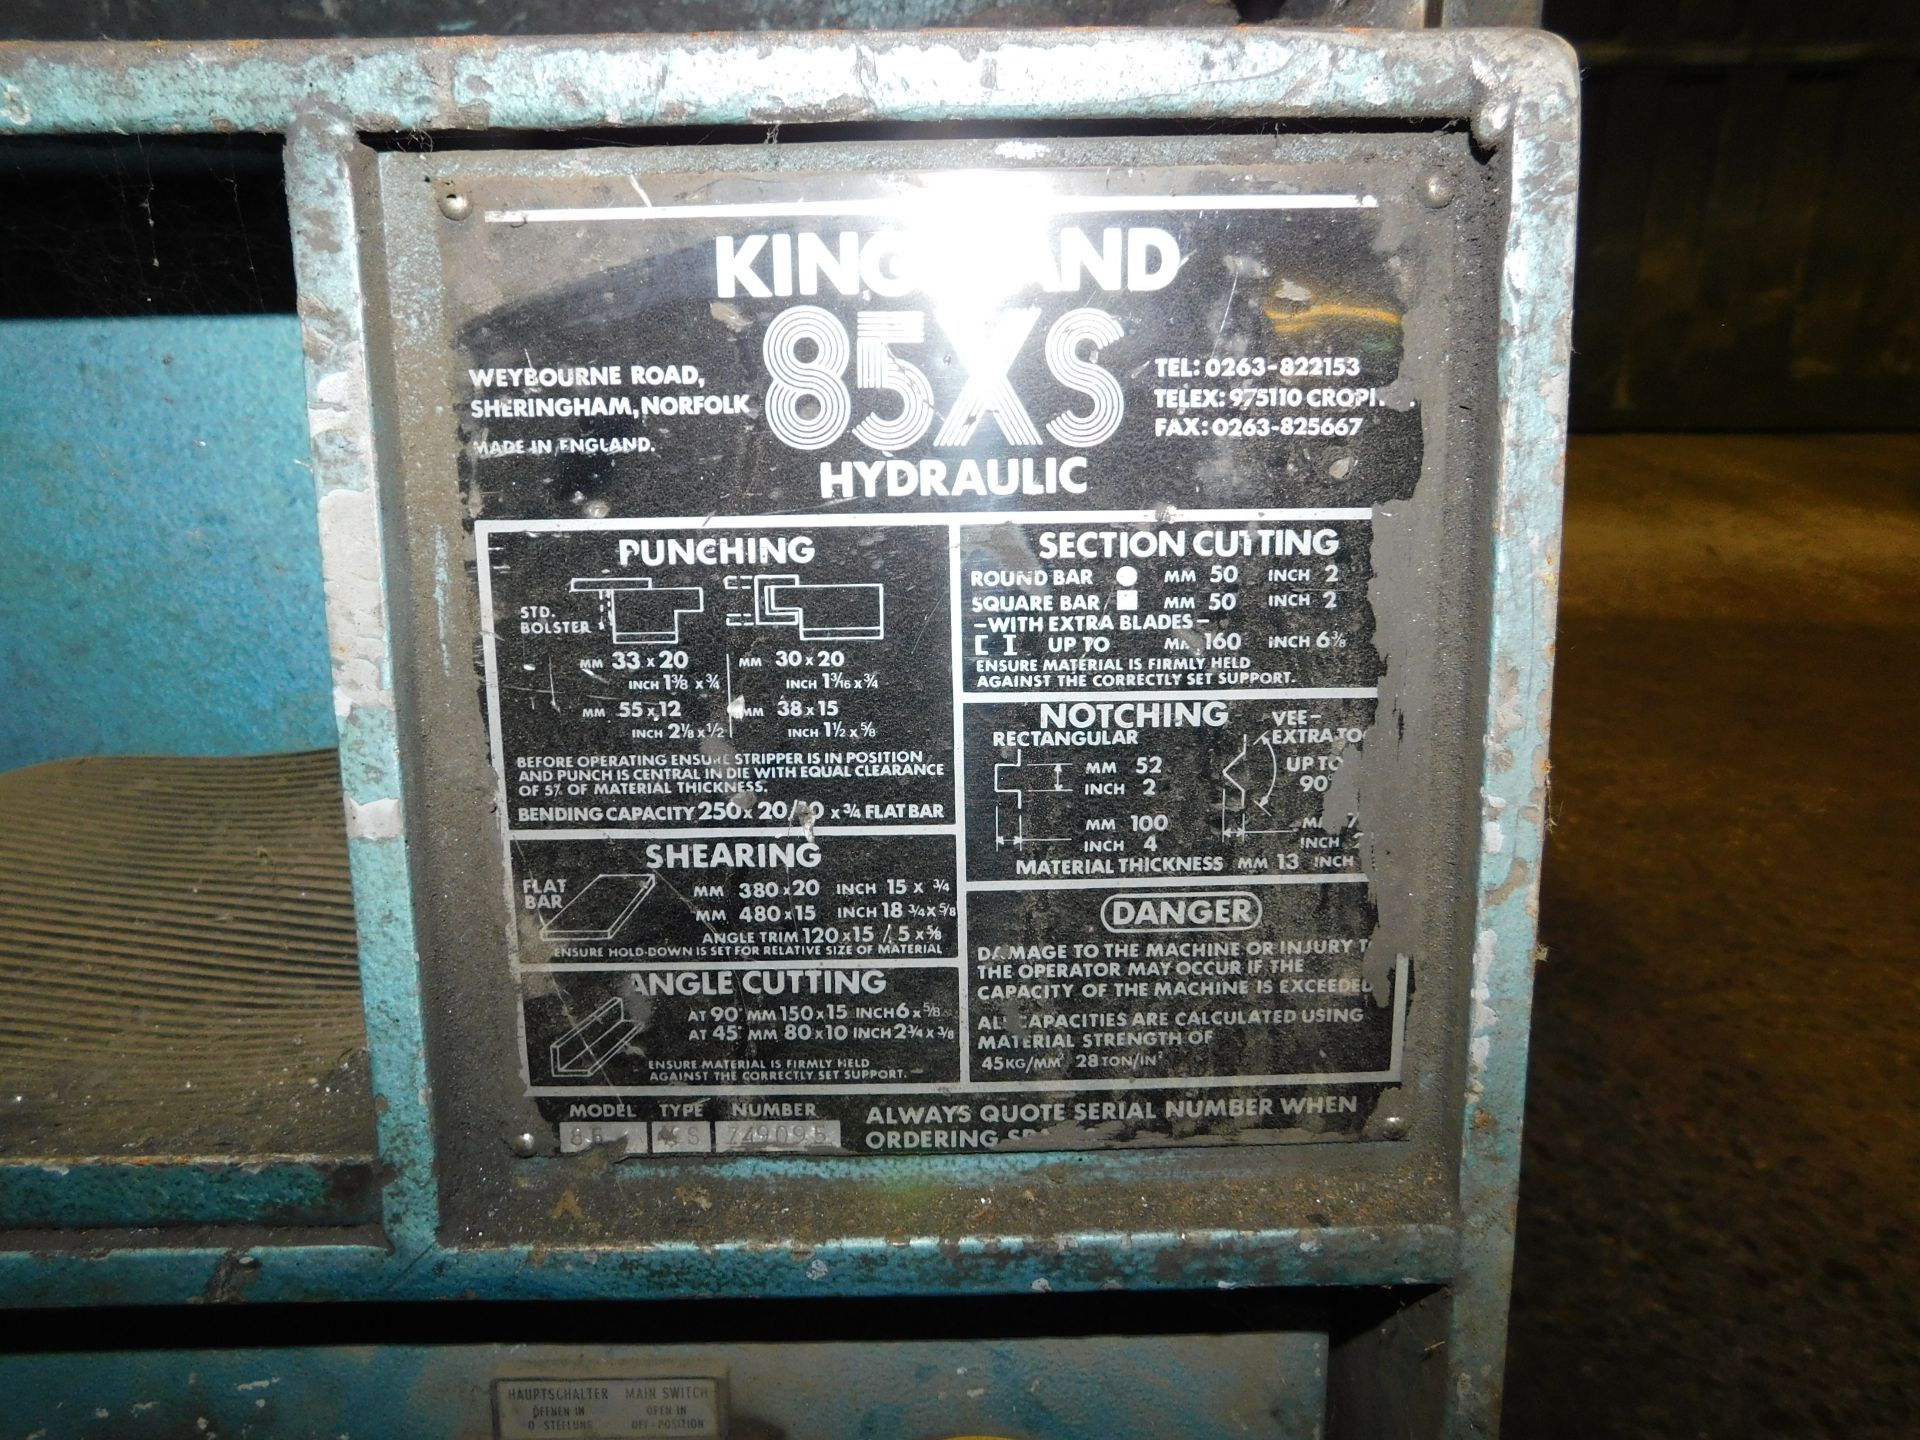 Kingsland 85XS Hydraulic Metal Worker, Serial Number Z49095 (Location: Finedon - Please Refer to - Image 3 of 3